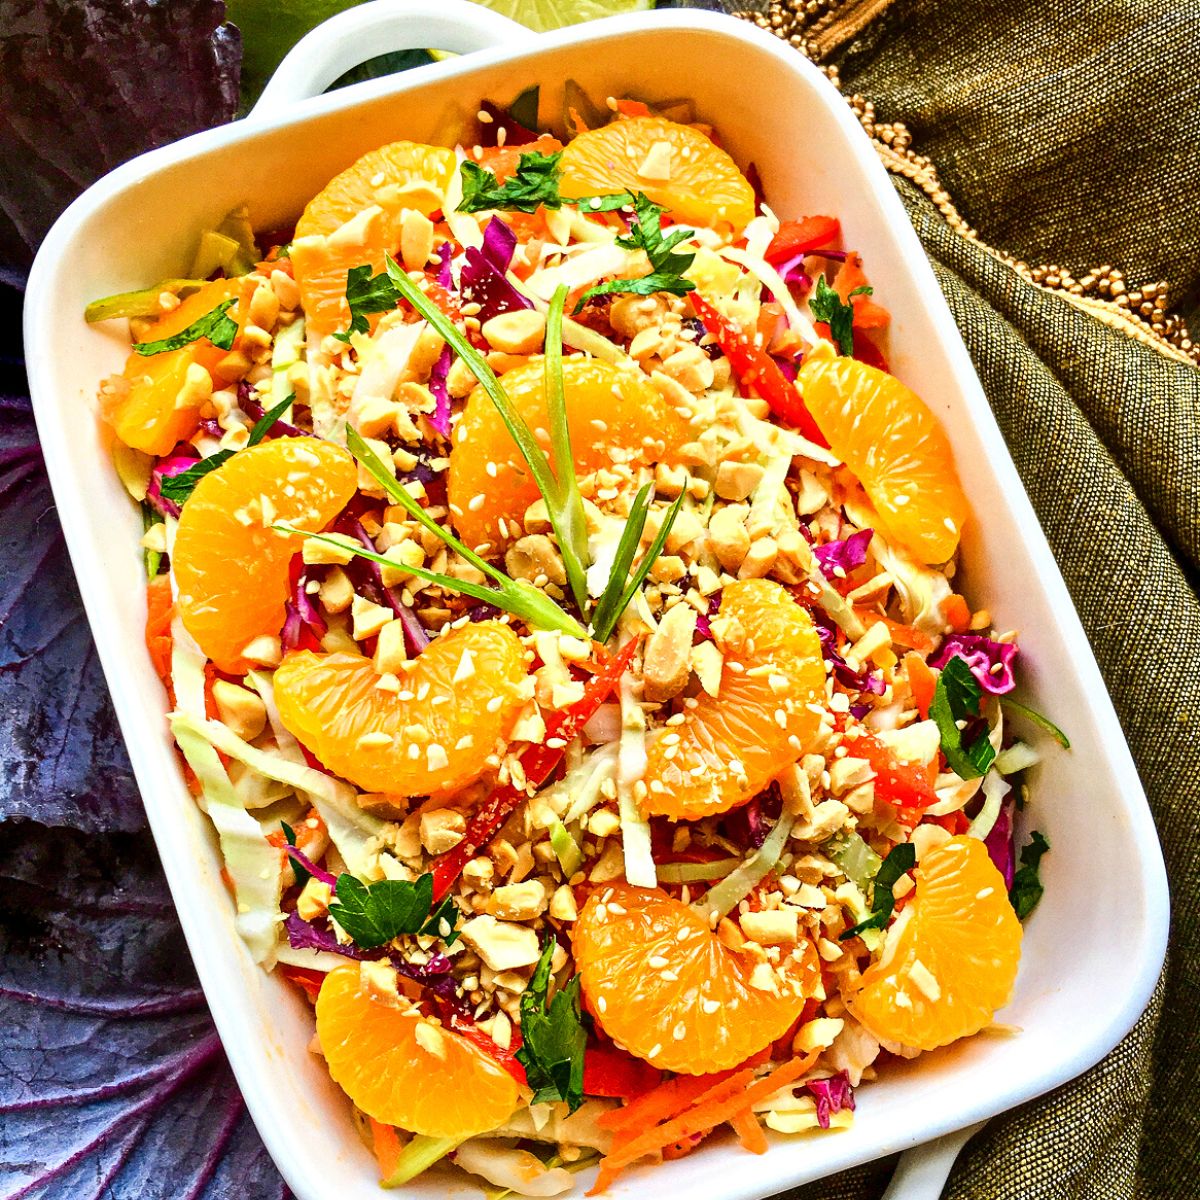 ASIAN CABBAGE SALAD WITH WARM SPICY PEANUT DRESSING